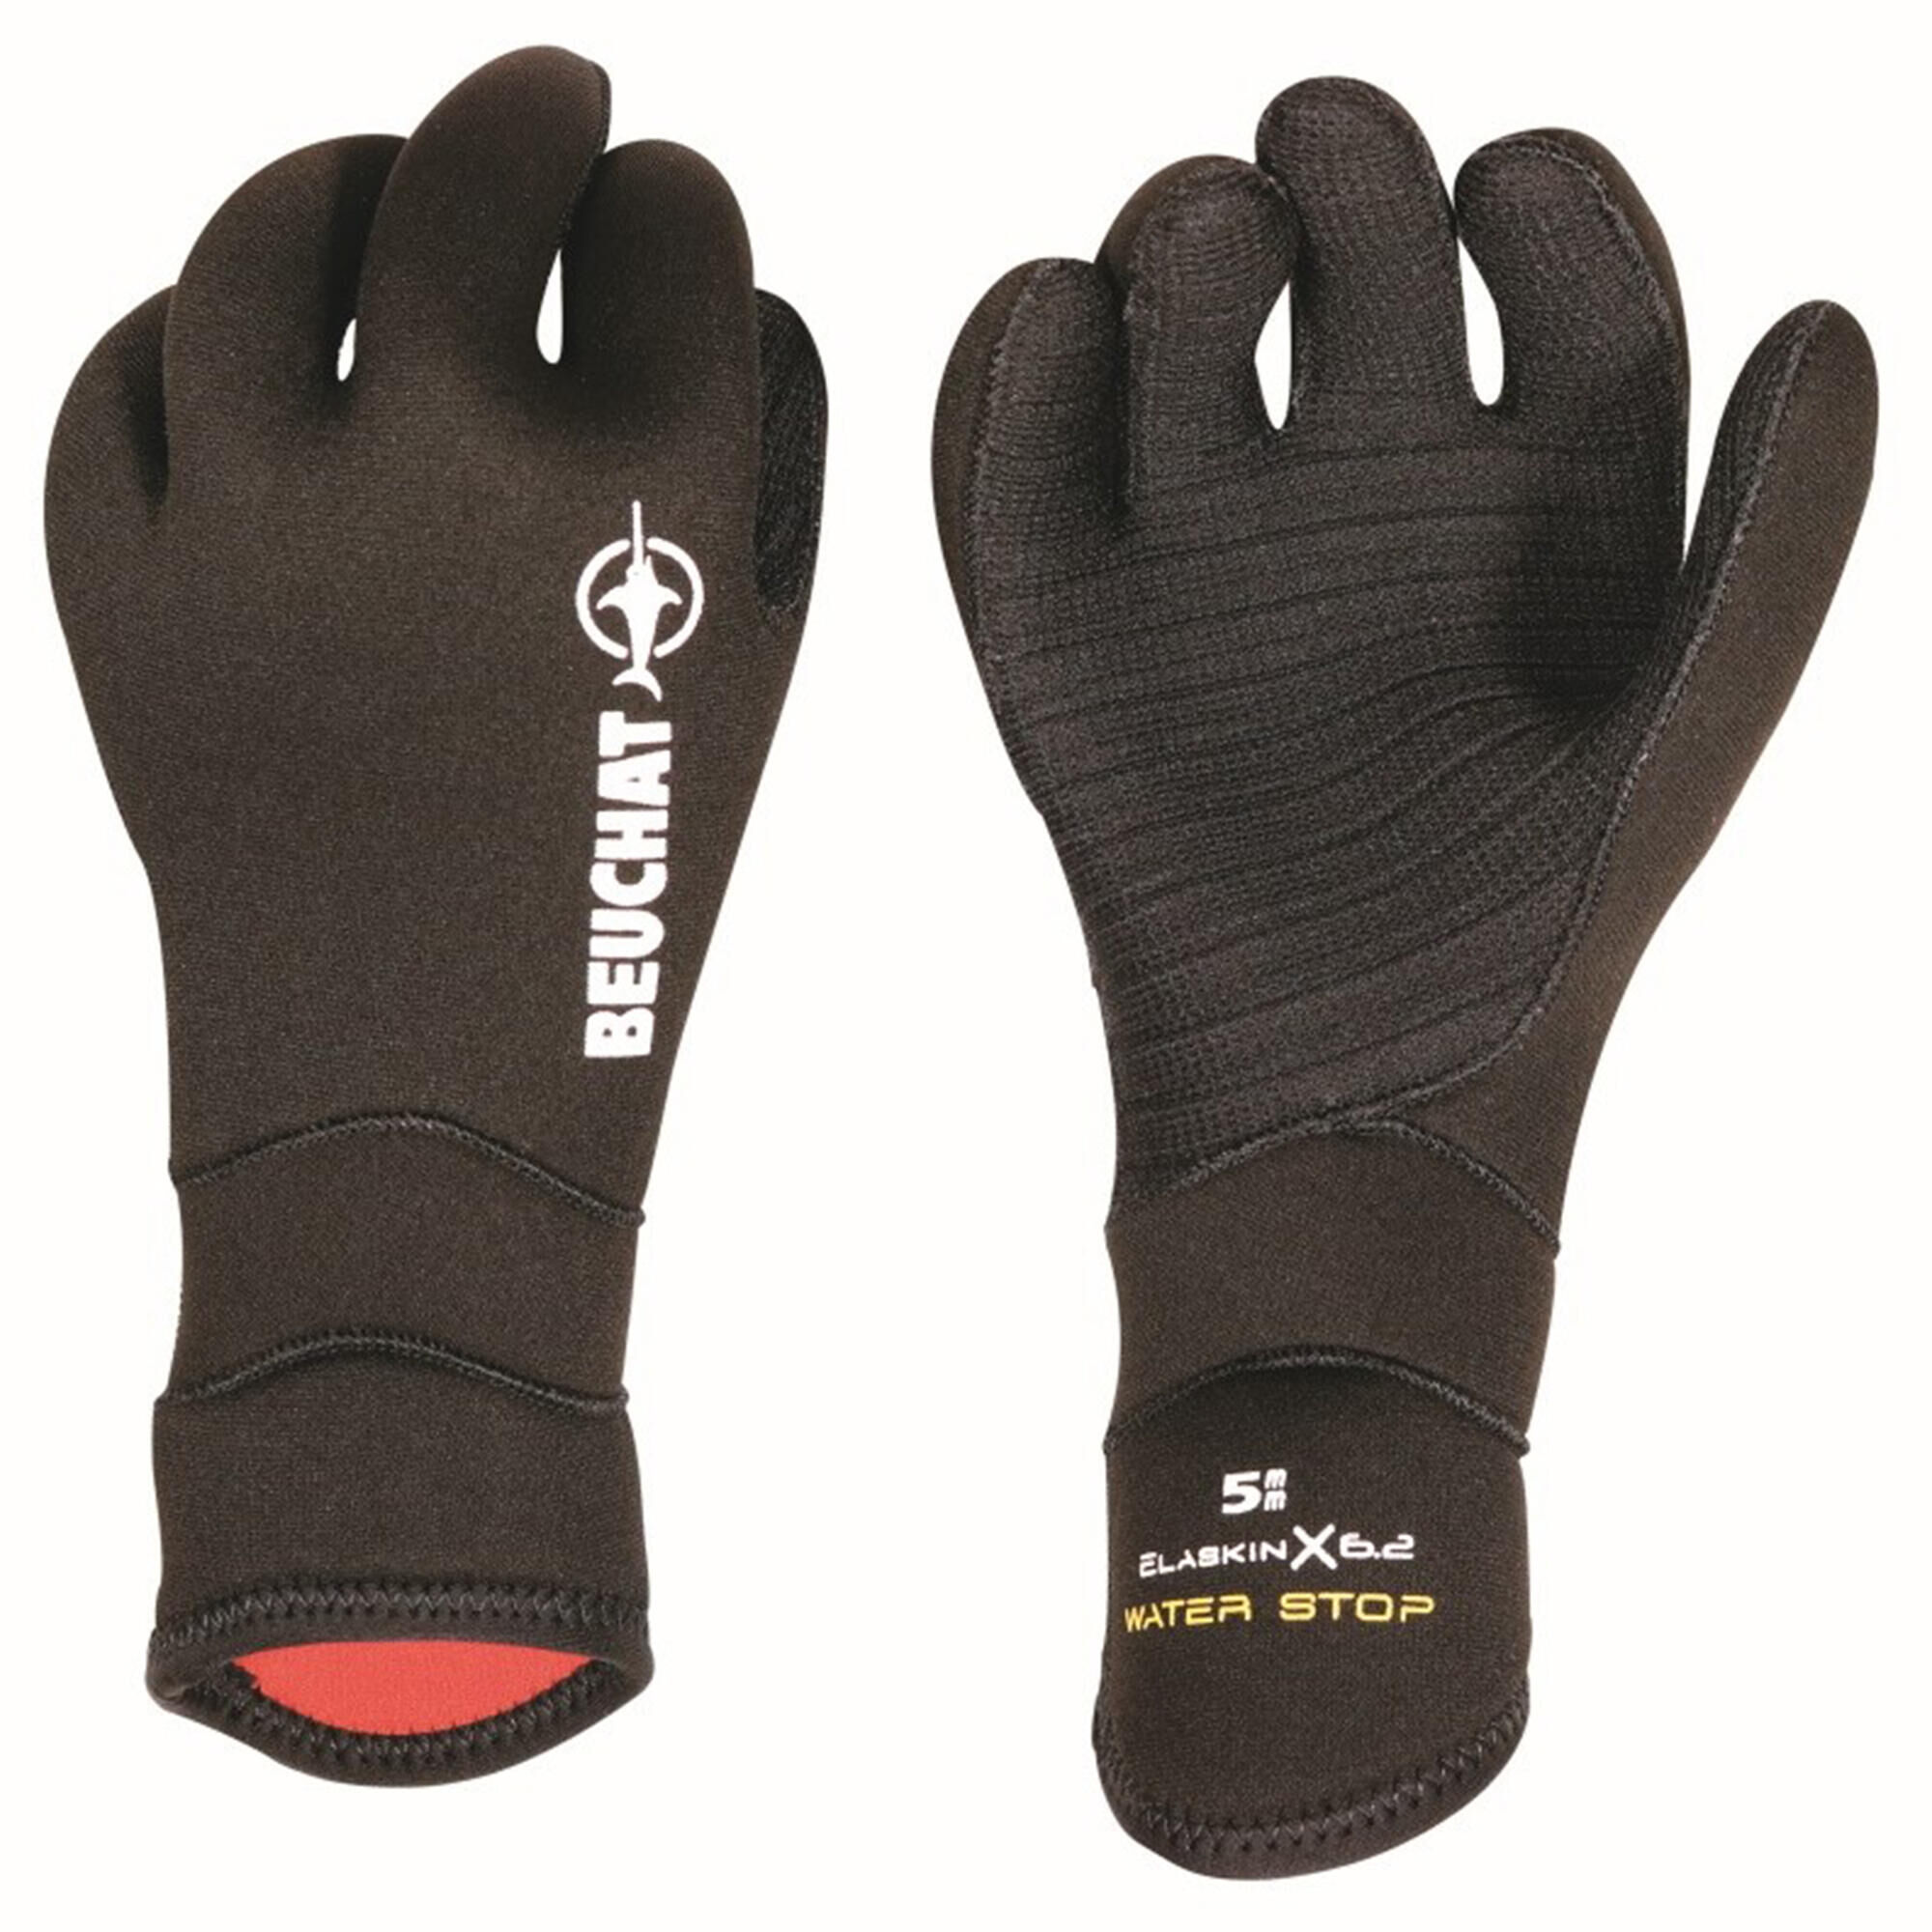 BEUCHAT Spearfishing gloves 5mm neoprene with smooth lining BEUCHAT - SIROCCO ELITE